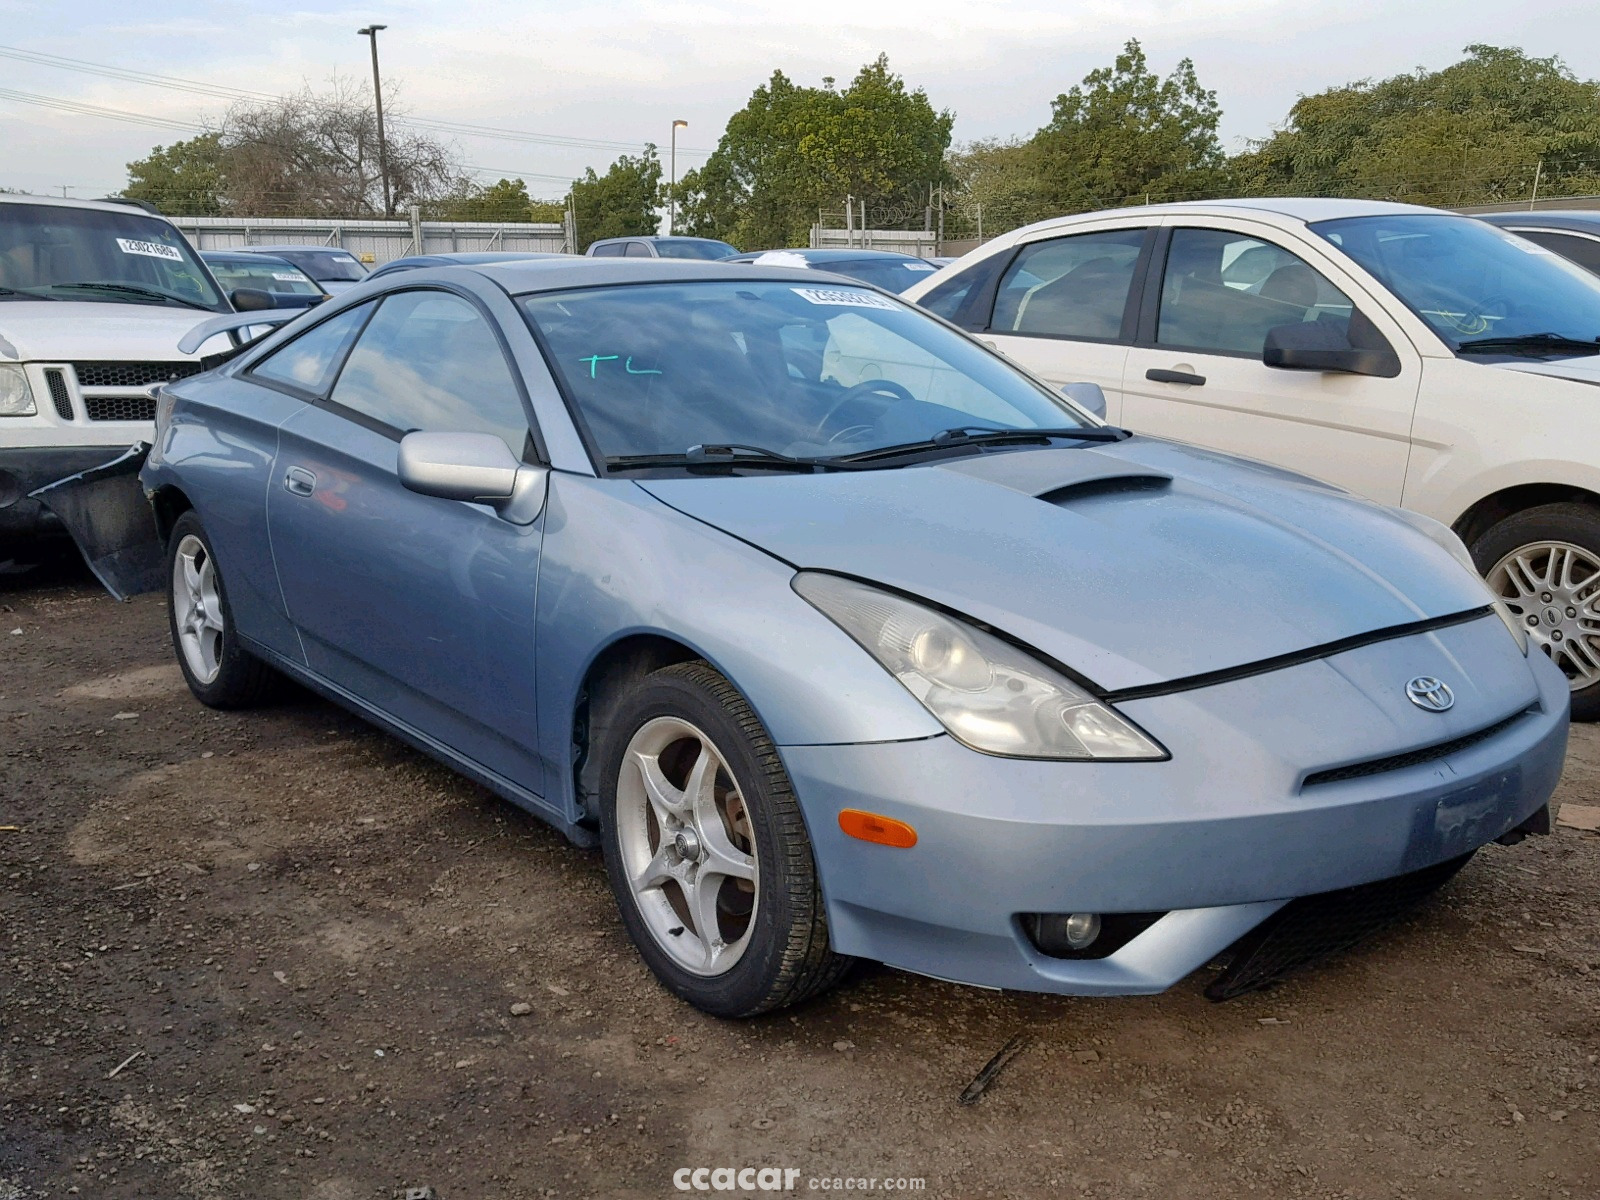 2003 Toyota Celica GT-S | Salvage & Damaged Cars for Sale